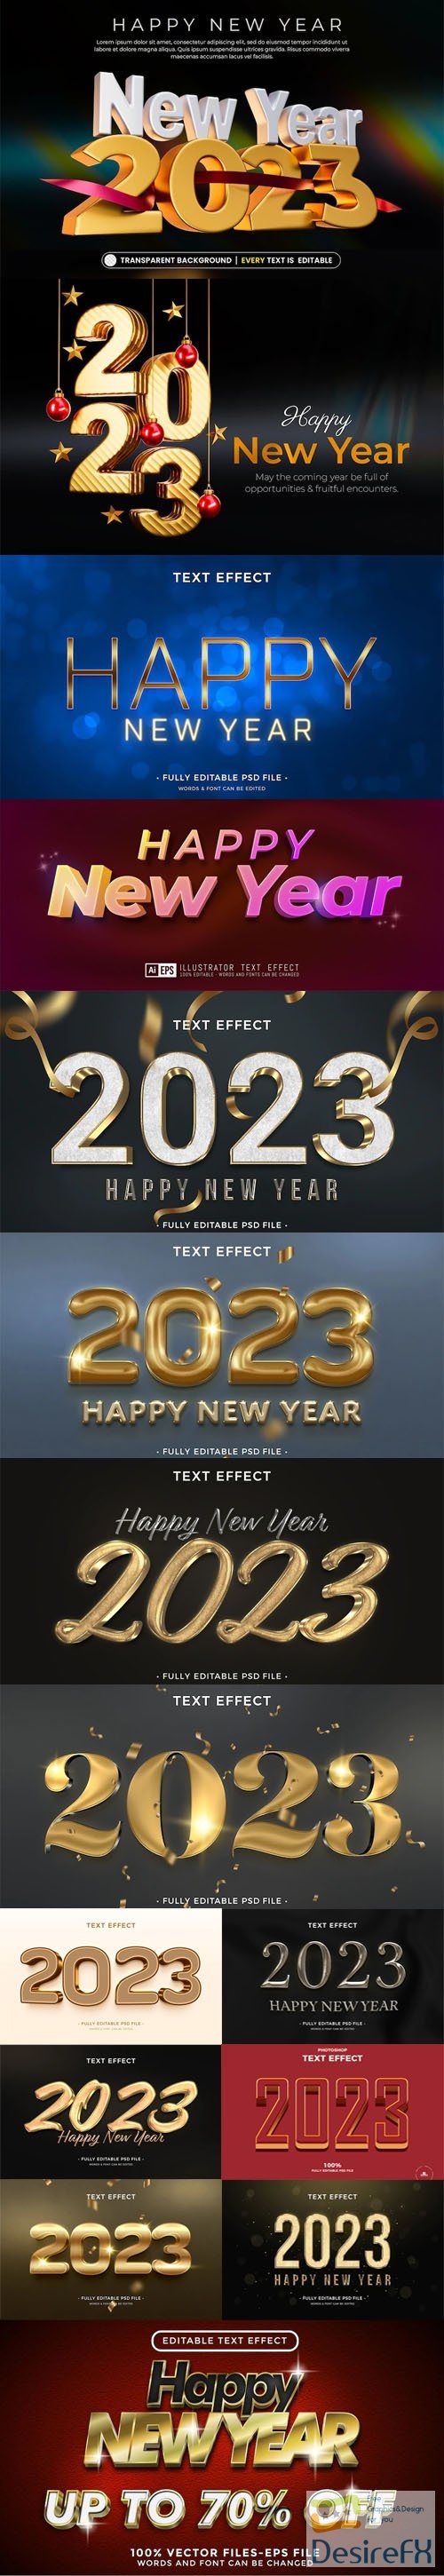 new year 2023 after effects template free download